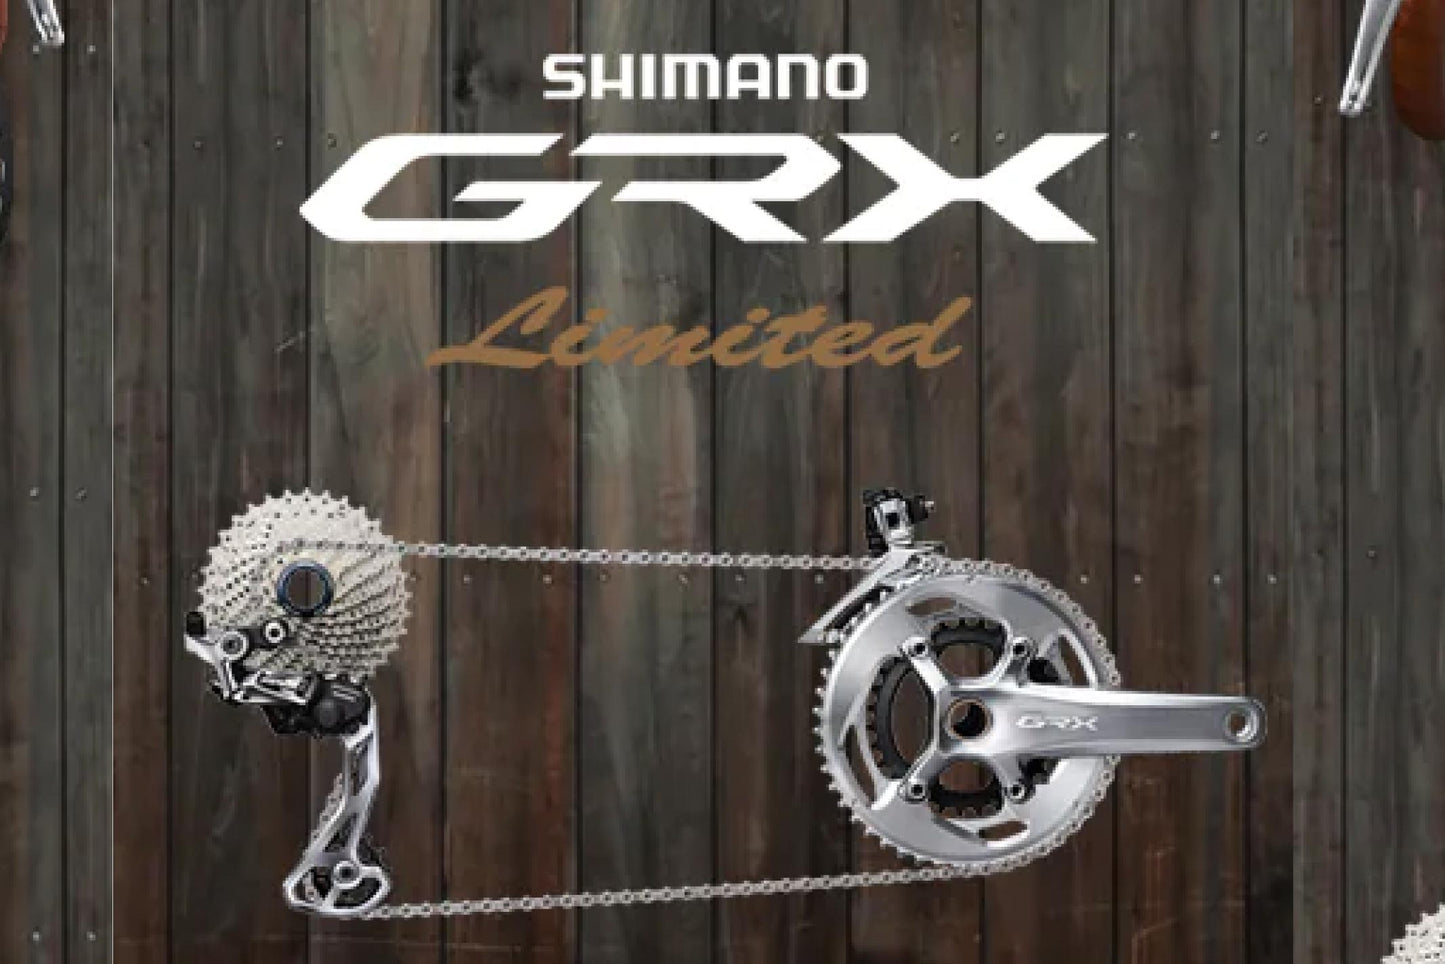 SHIMANO GRX Limited Edition Groupset